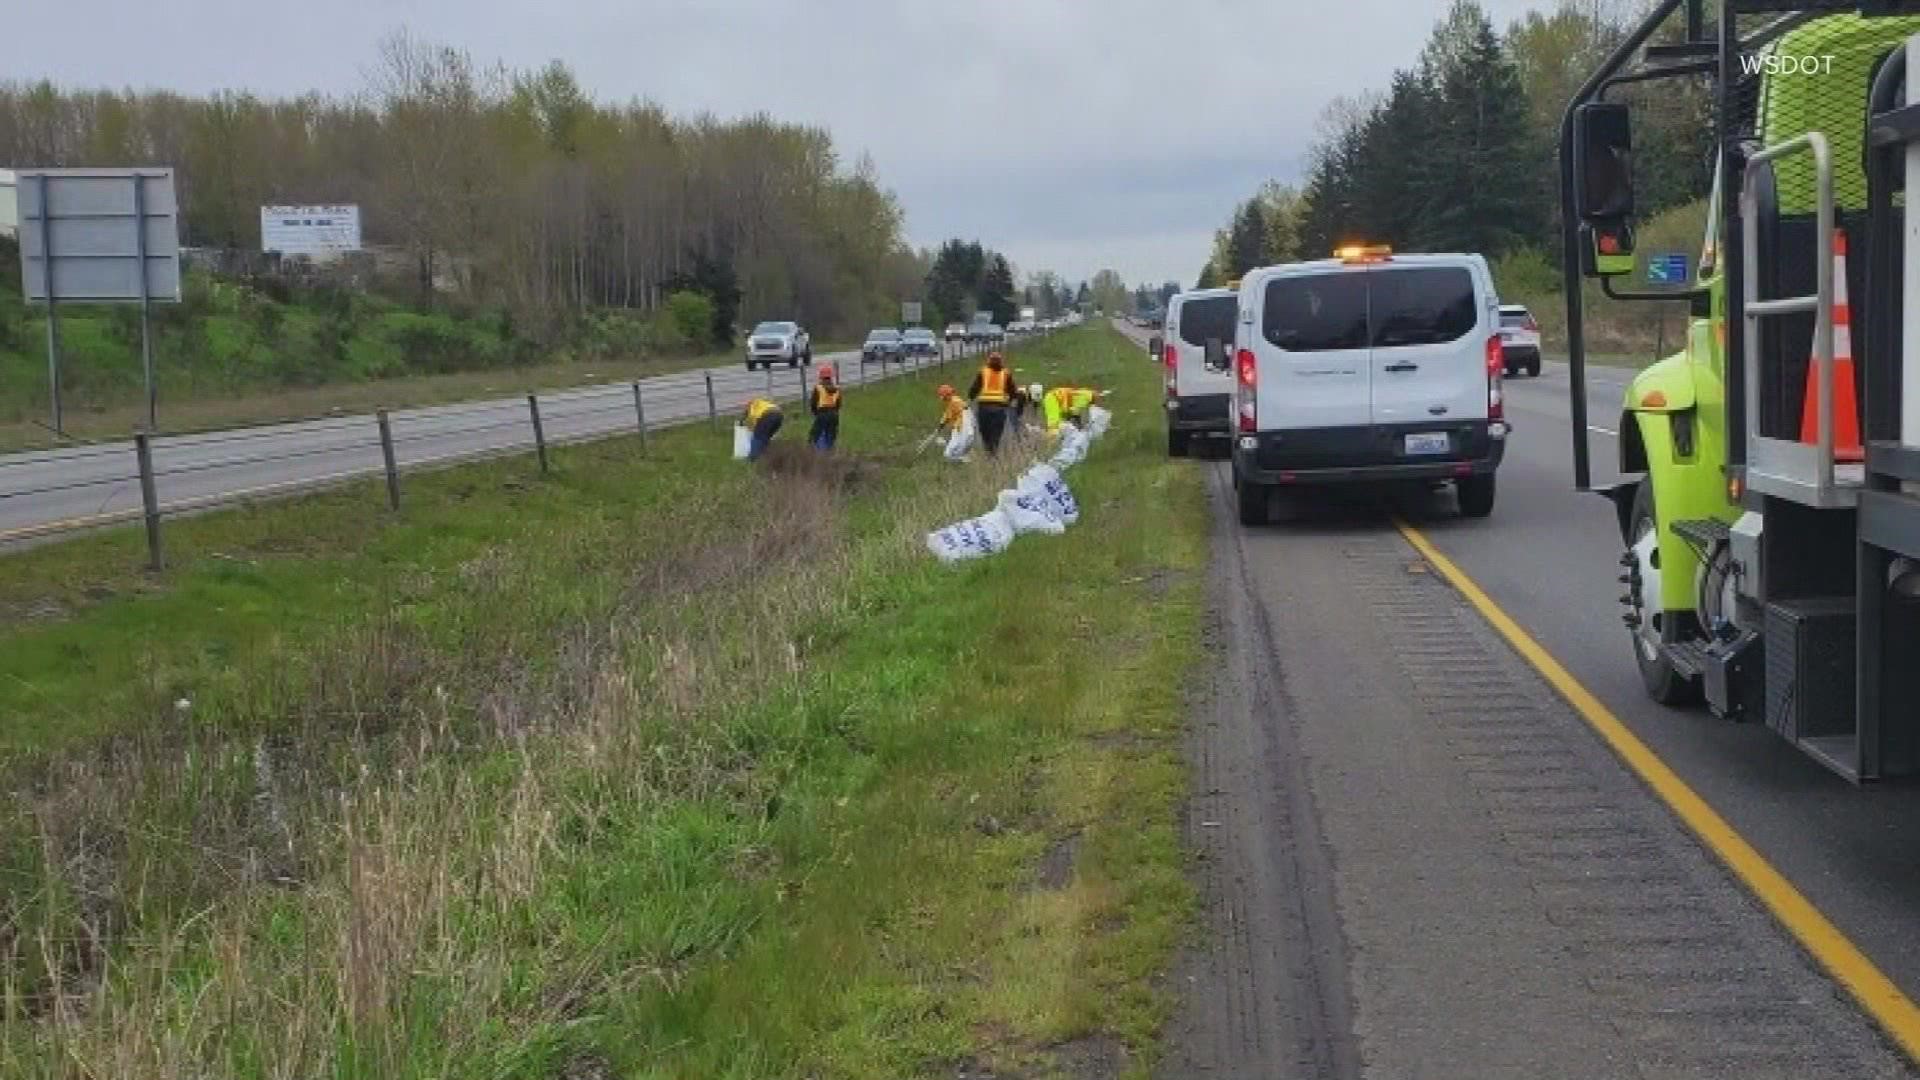 The cleanup comes after the Department of Ecology received multiple complaints about trash and debris on the side of the highway.